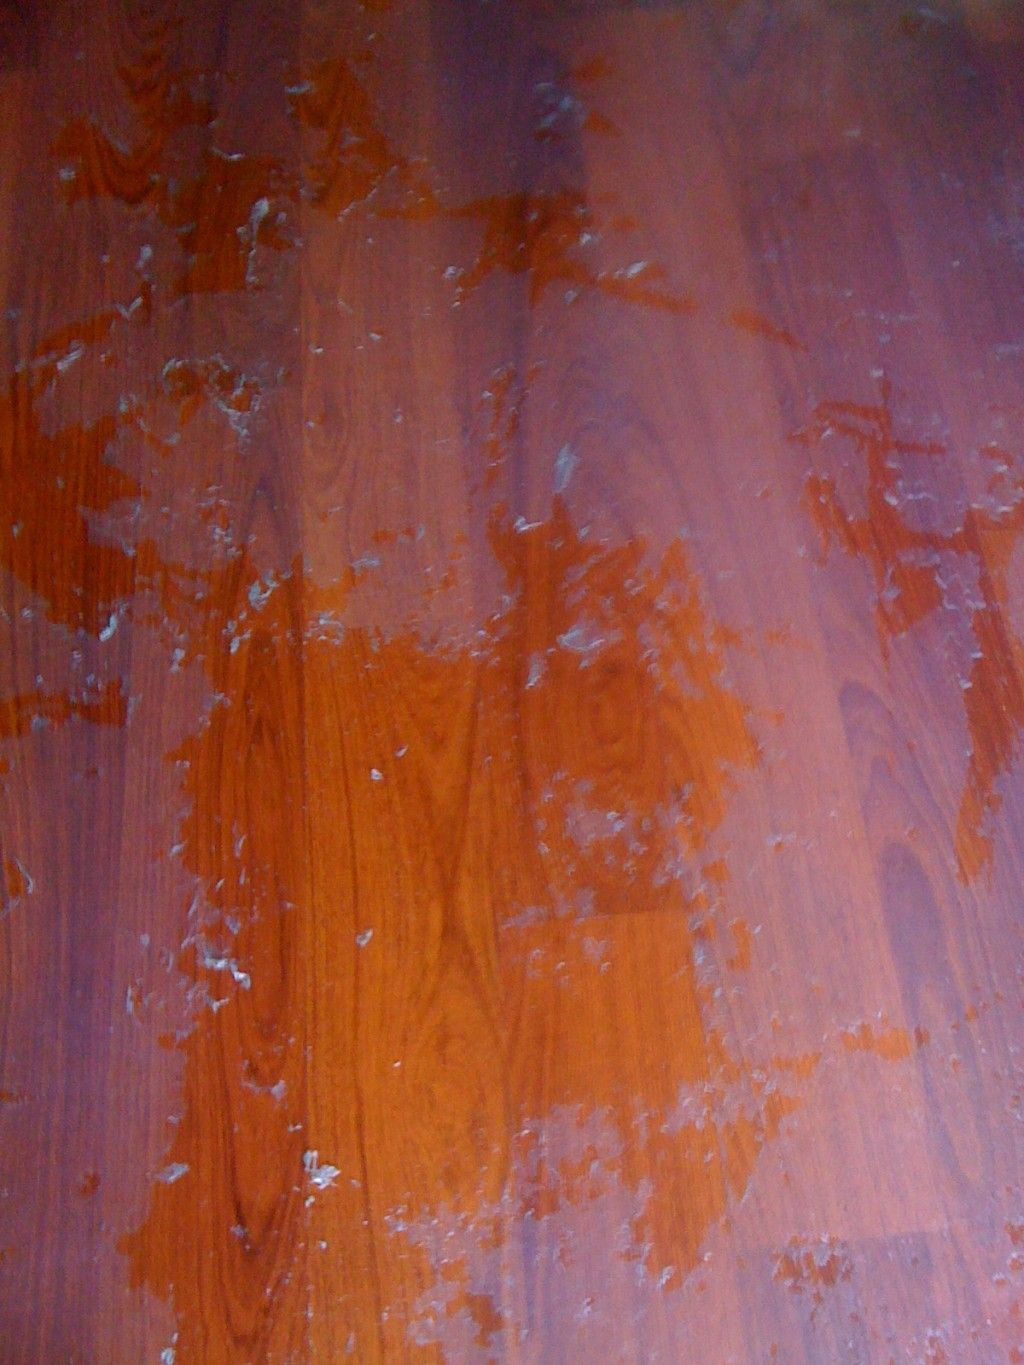 15 Unique Vinegar and Hardwood Floors 2024 free download vinegar and hardwood floors of how to remove wax and oil soap cleaners from wood floors recipes intended for how to remove oily or wax build up from cleaning or polishing solutions from wood